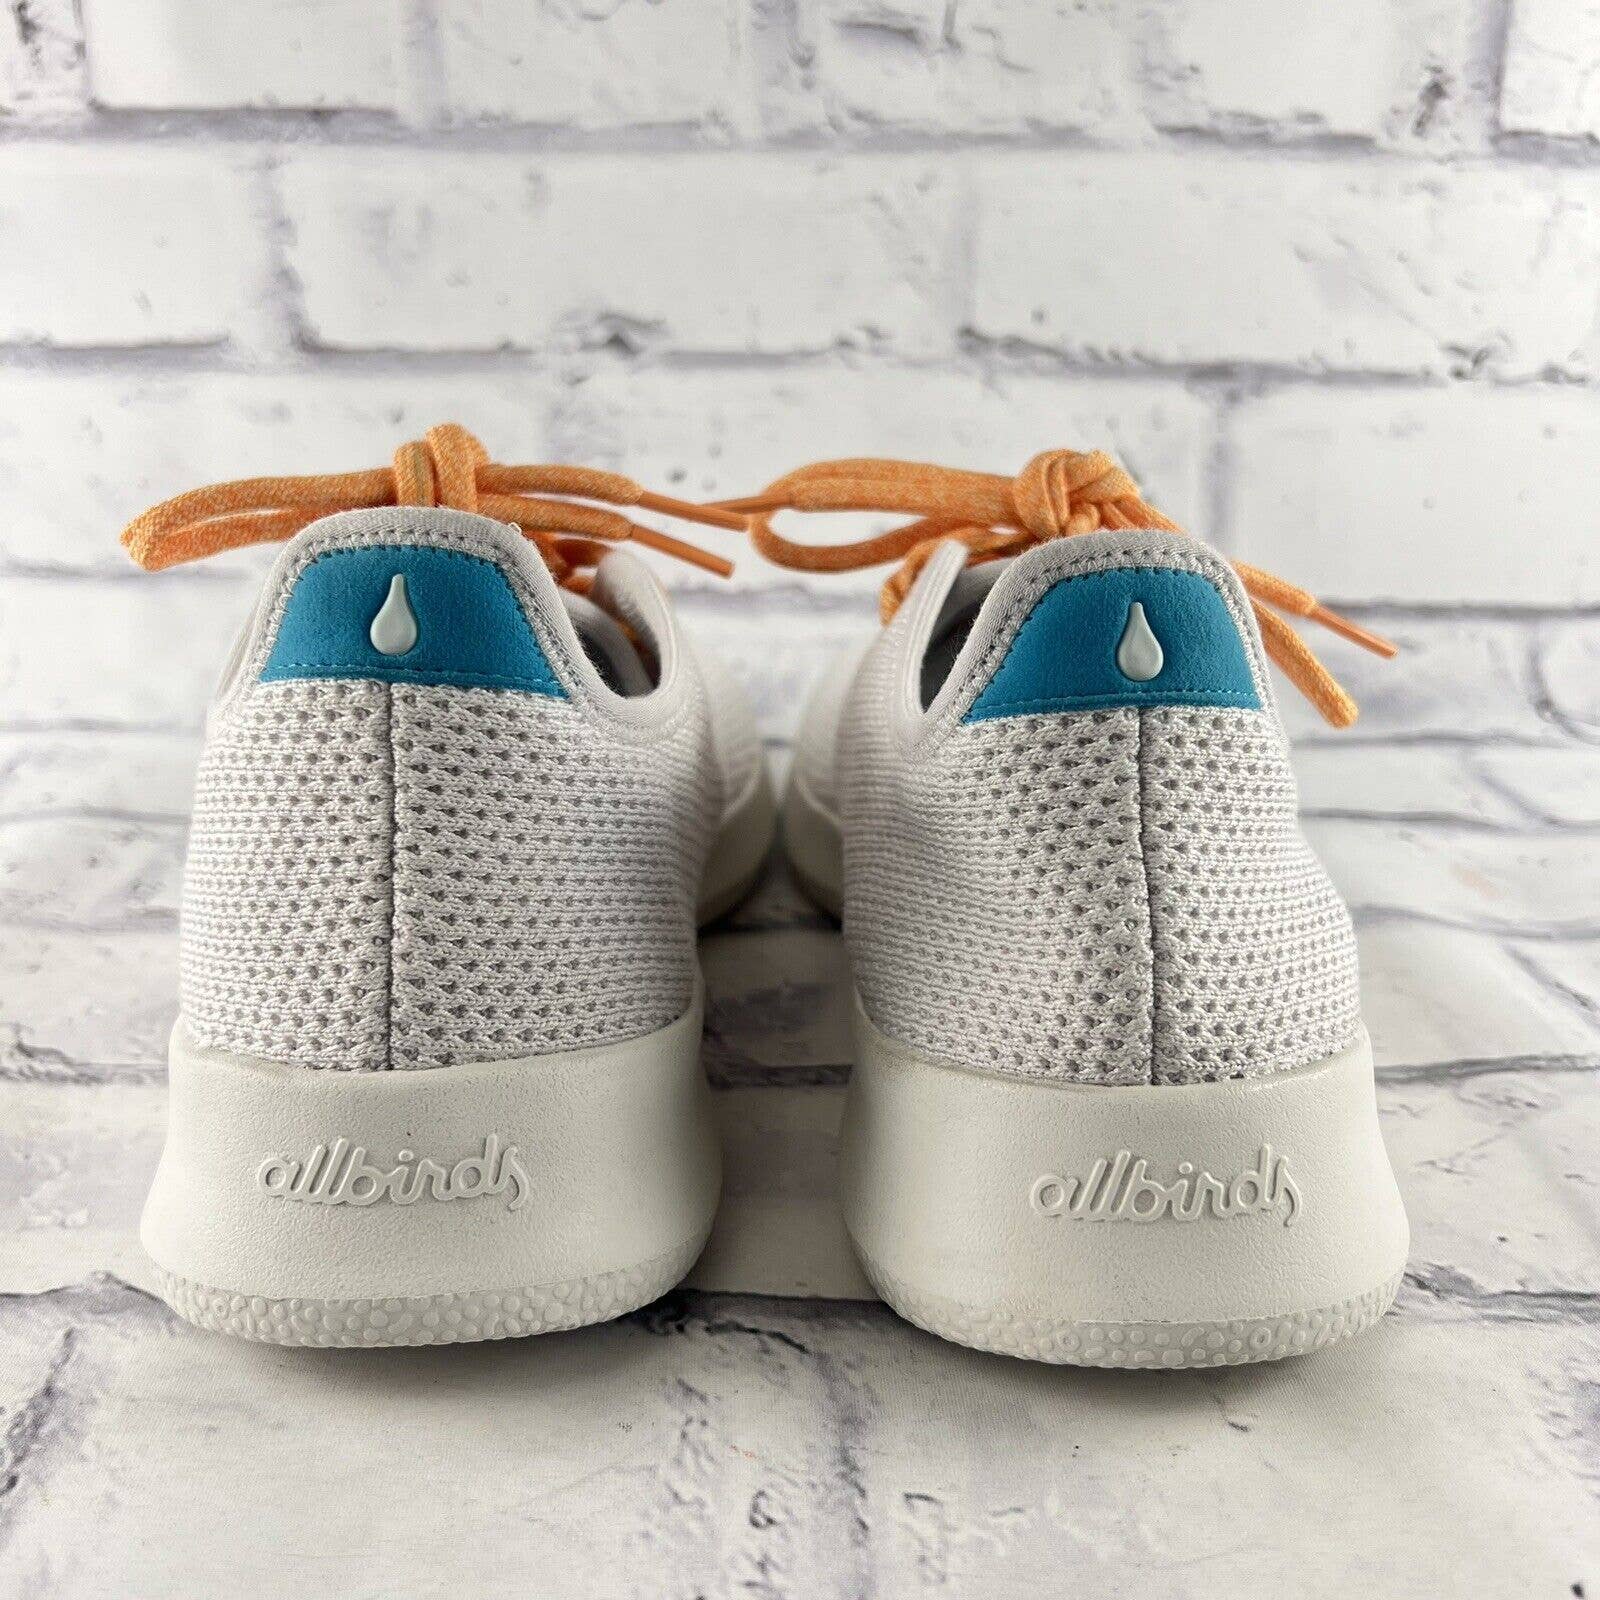 Allbirds Tree Runners Running Shoes Women's 9 White Sneakers Orange Laces